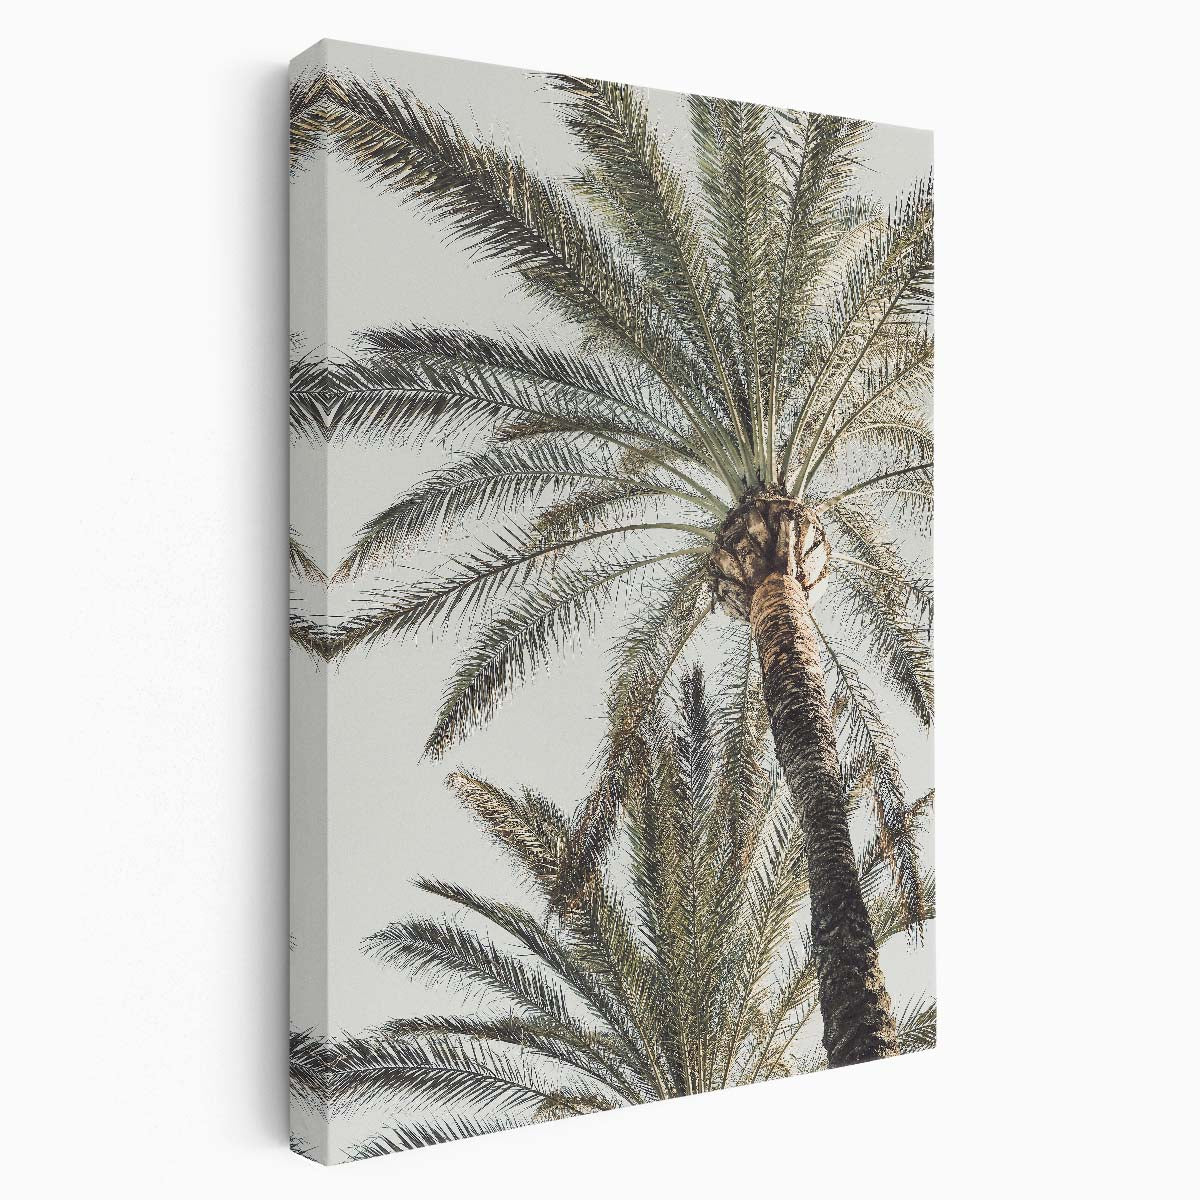 Tropical Paradise Palm Tree Leaves Landscape Photography Wall Art by Luxuriance Designs, made in USA